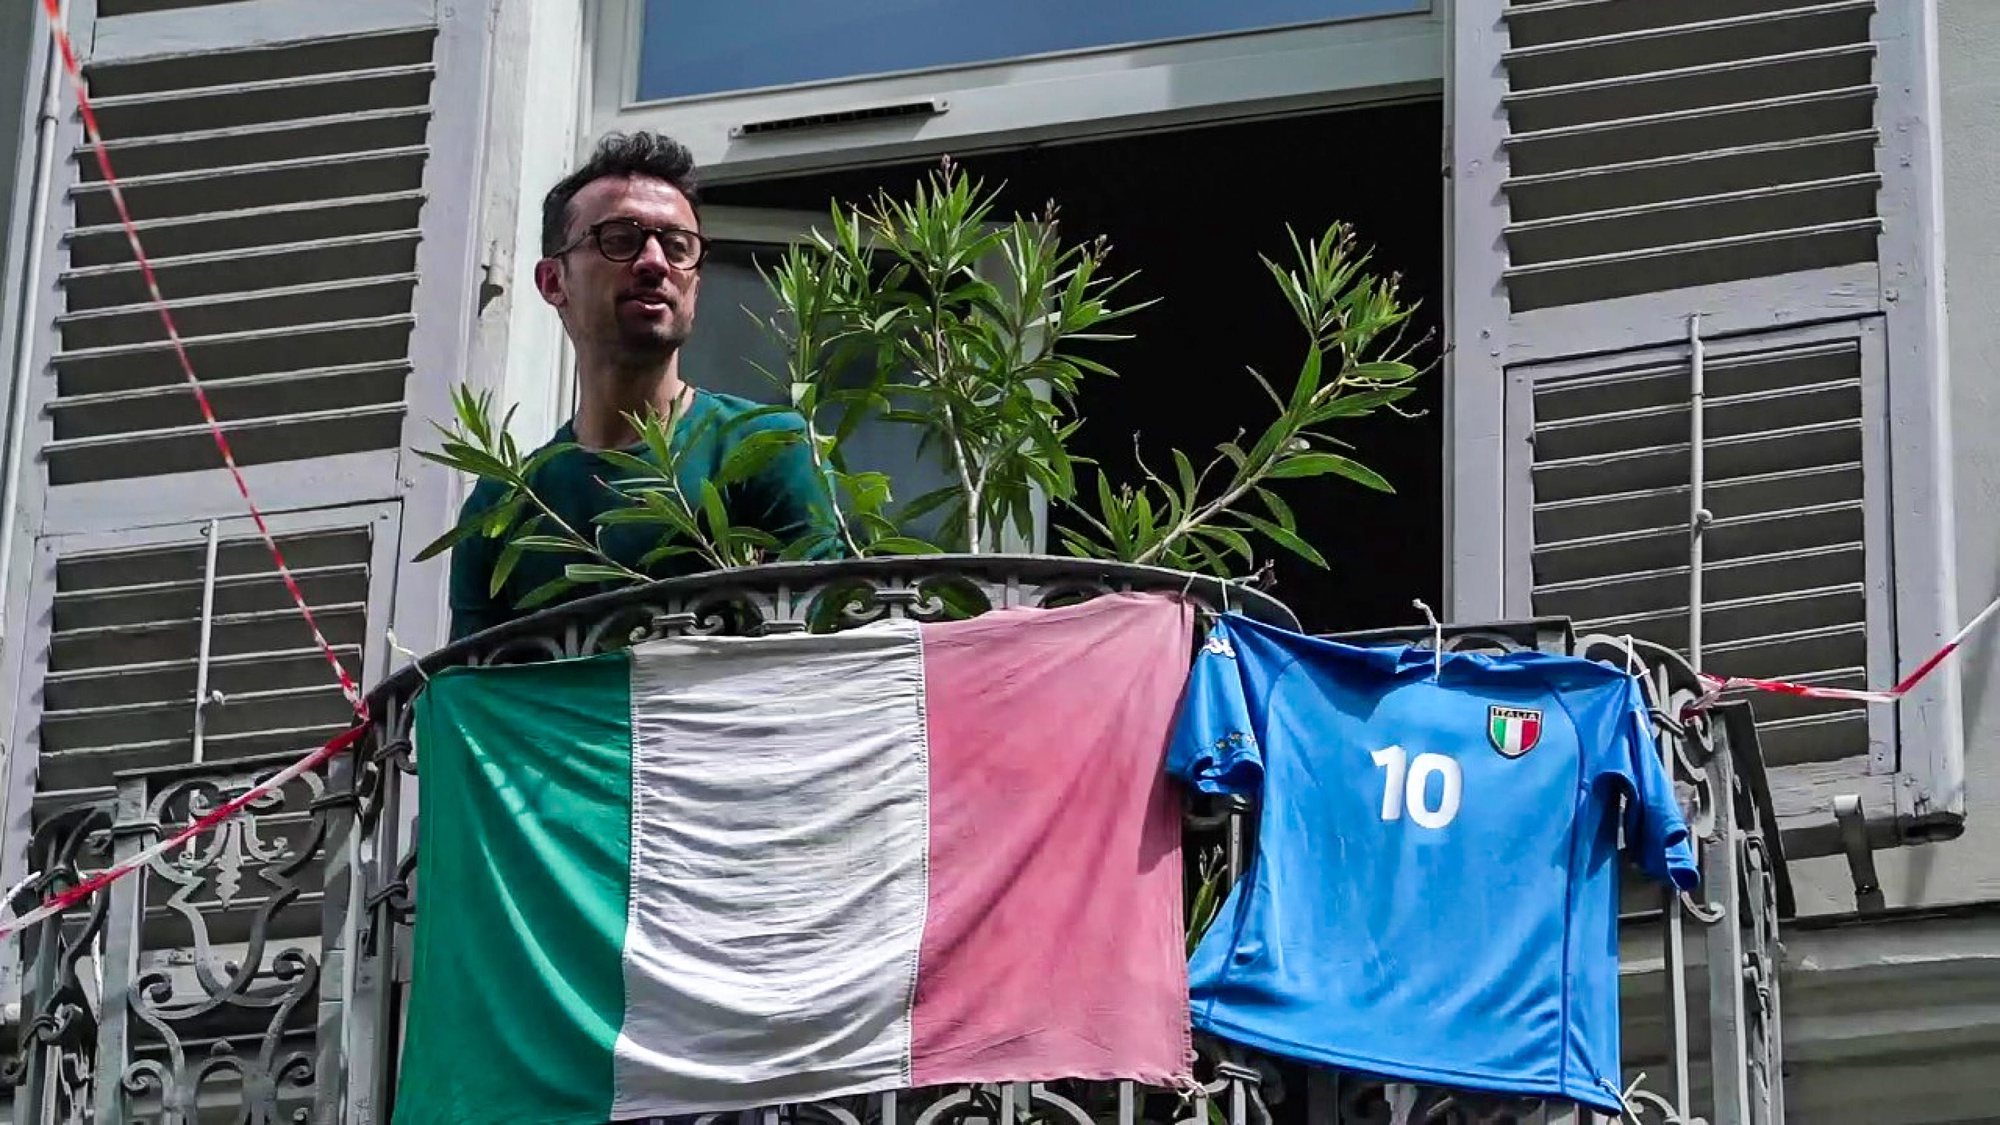 epa08395770 A man on the balcony displays the Italian flag and the jersey of the national football team amid the ongoing pandemic of the COVID-19 disease caused by the SARS-CoV-2 coronavirus in Turin, Italy,  01 May 2020.  EPA/TINO ROMANO